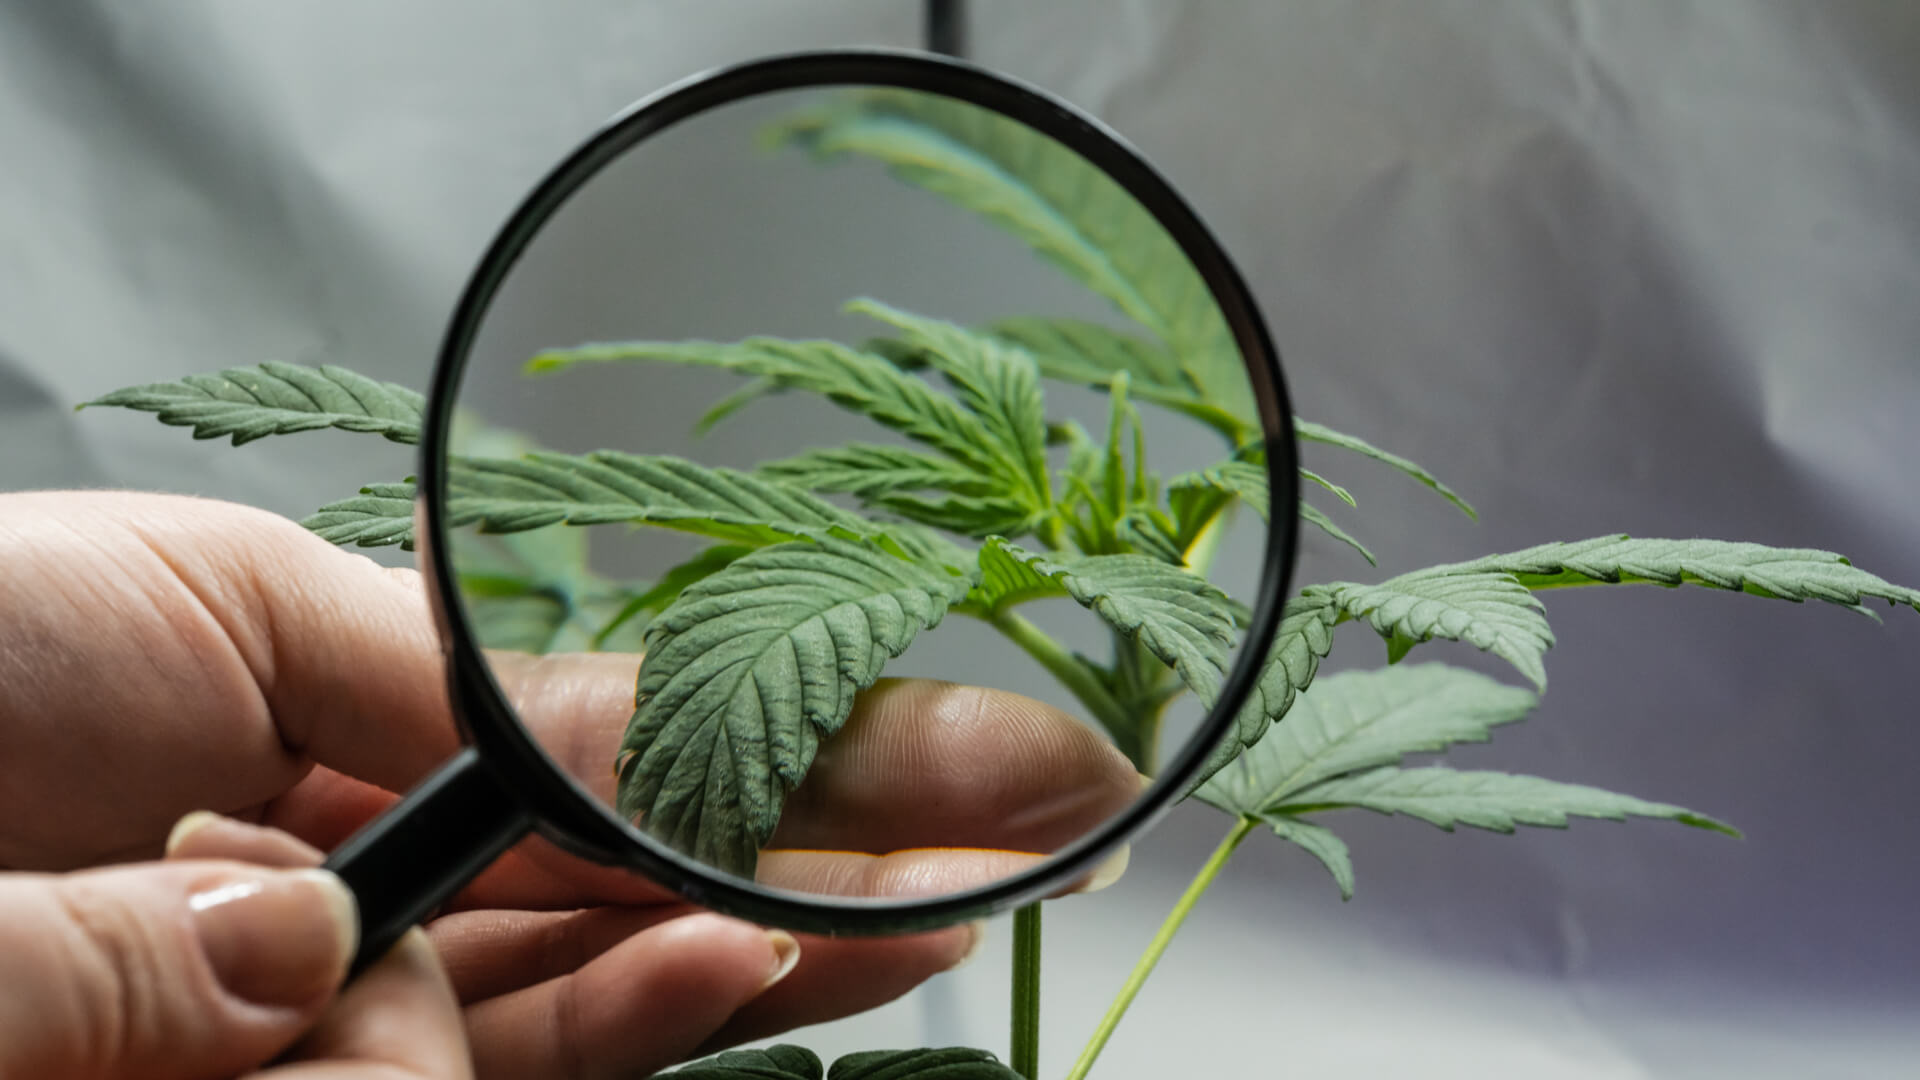 A person looks at medical marijuana plant with a magnifier